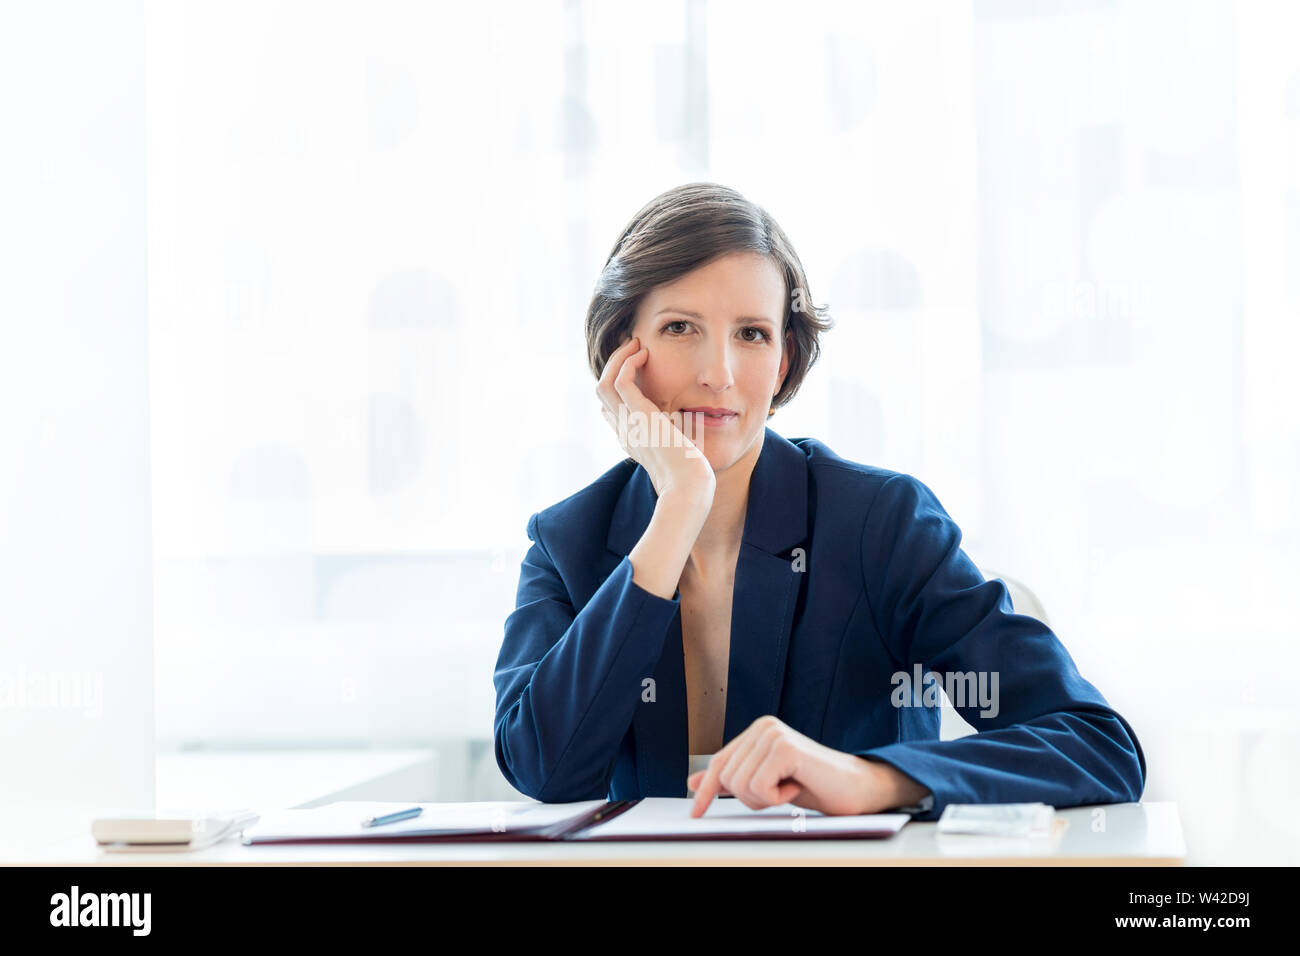 Thoughtful businesswoman staring pensively ahead at the camera with her chin resting on her hand as she sits at a desk in the office working on docume Stock Photo